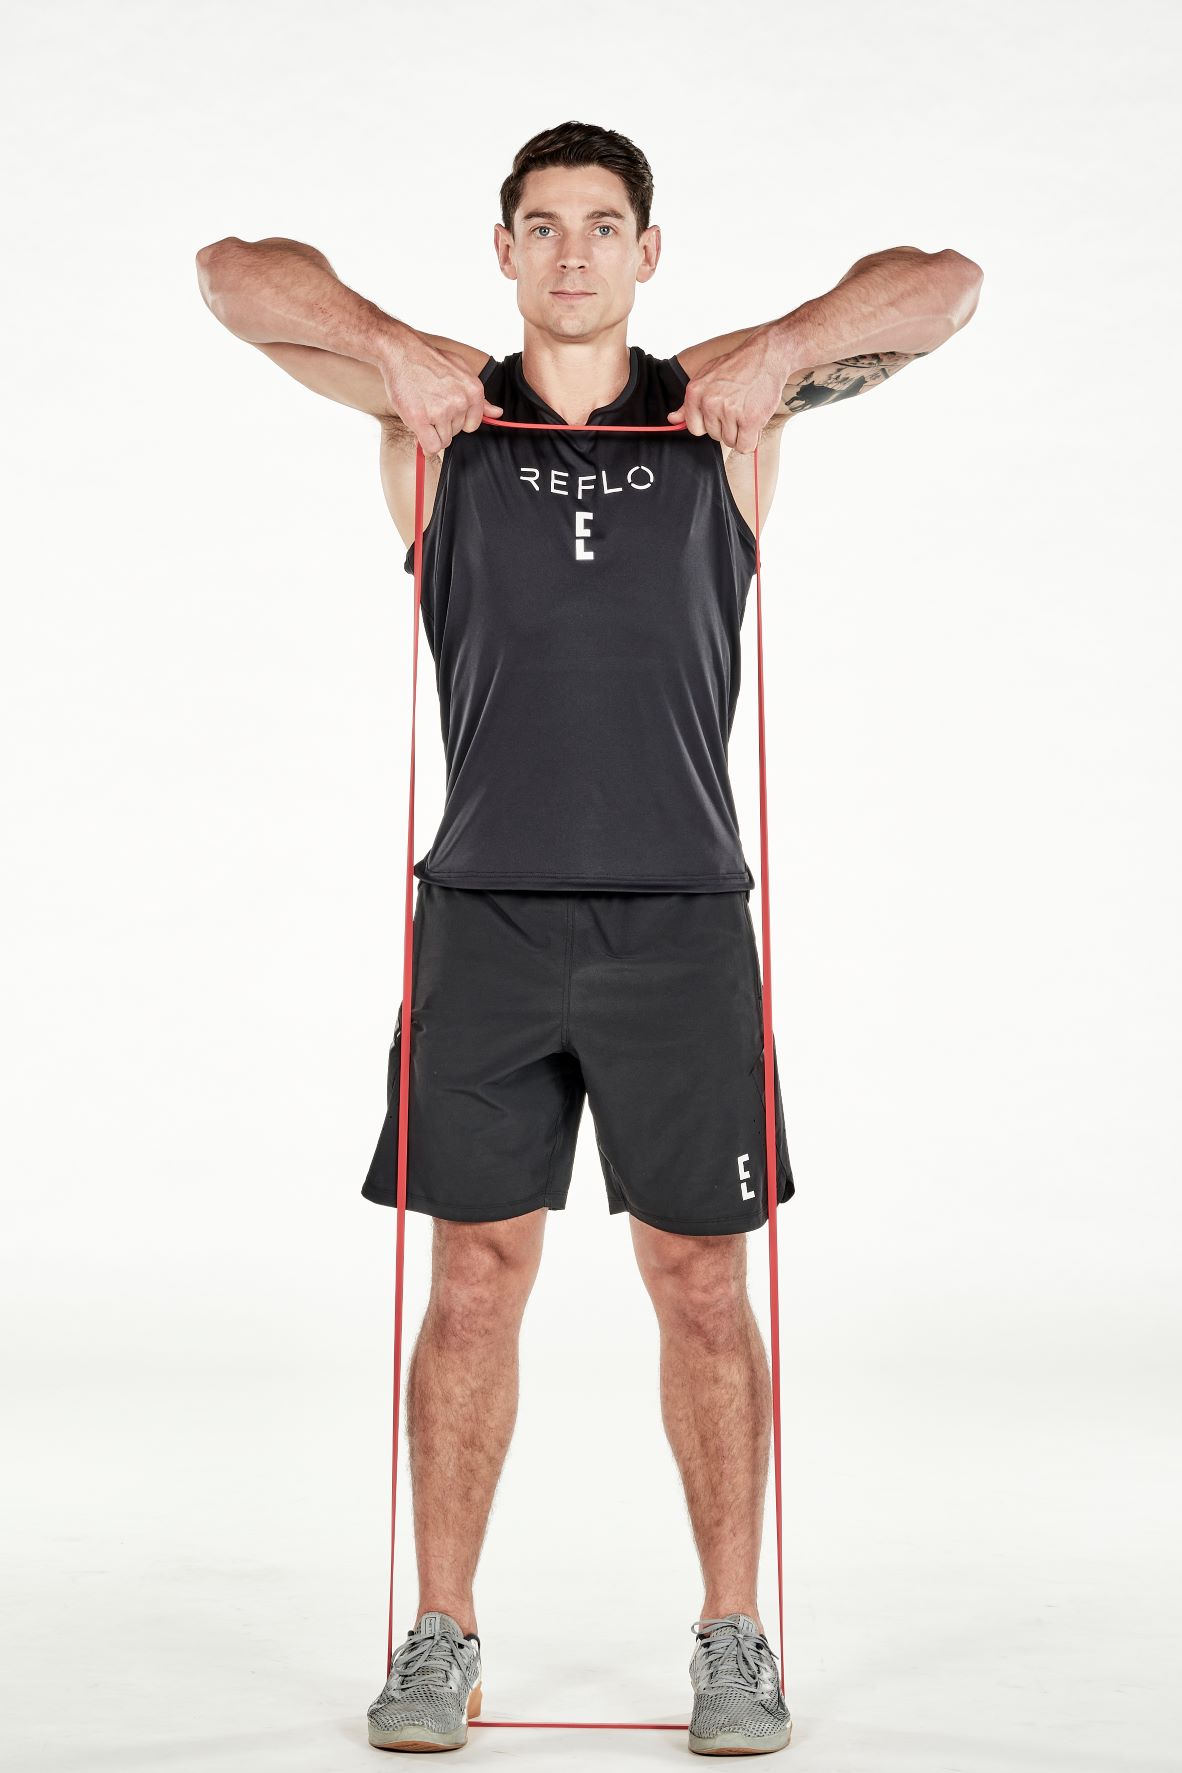 man demonstrating step two of upright row; he stands upright, both hands holding a resistance band that is secured under his feet; he pulls up on the band until level with his shoulders; he wears a black fitness vest, black shorts and trainers